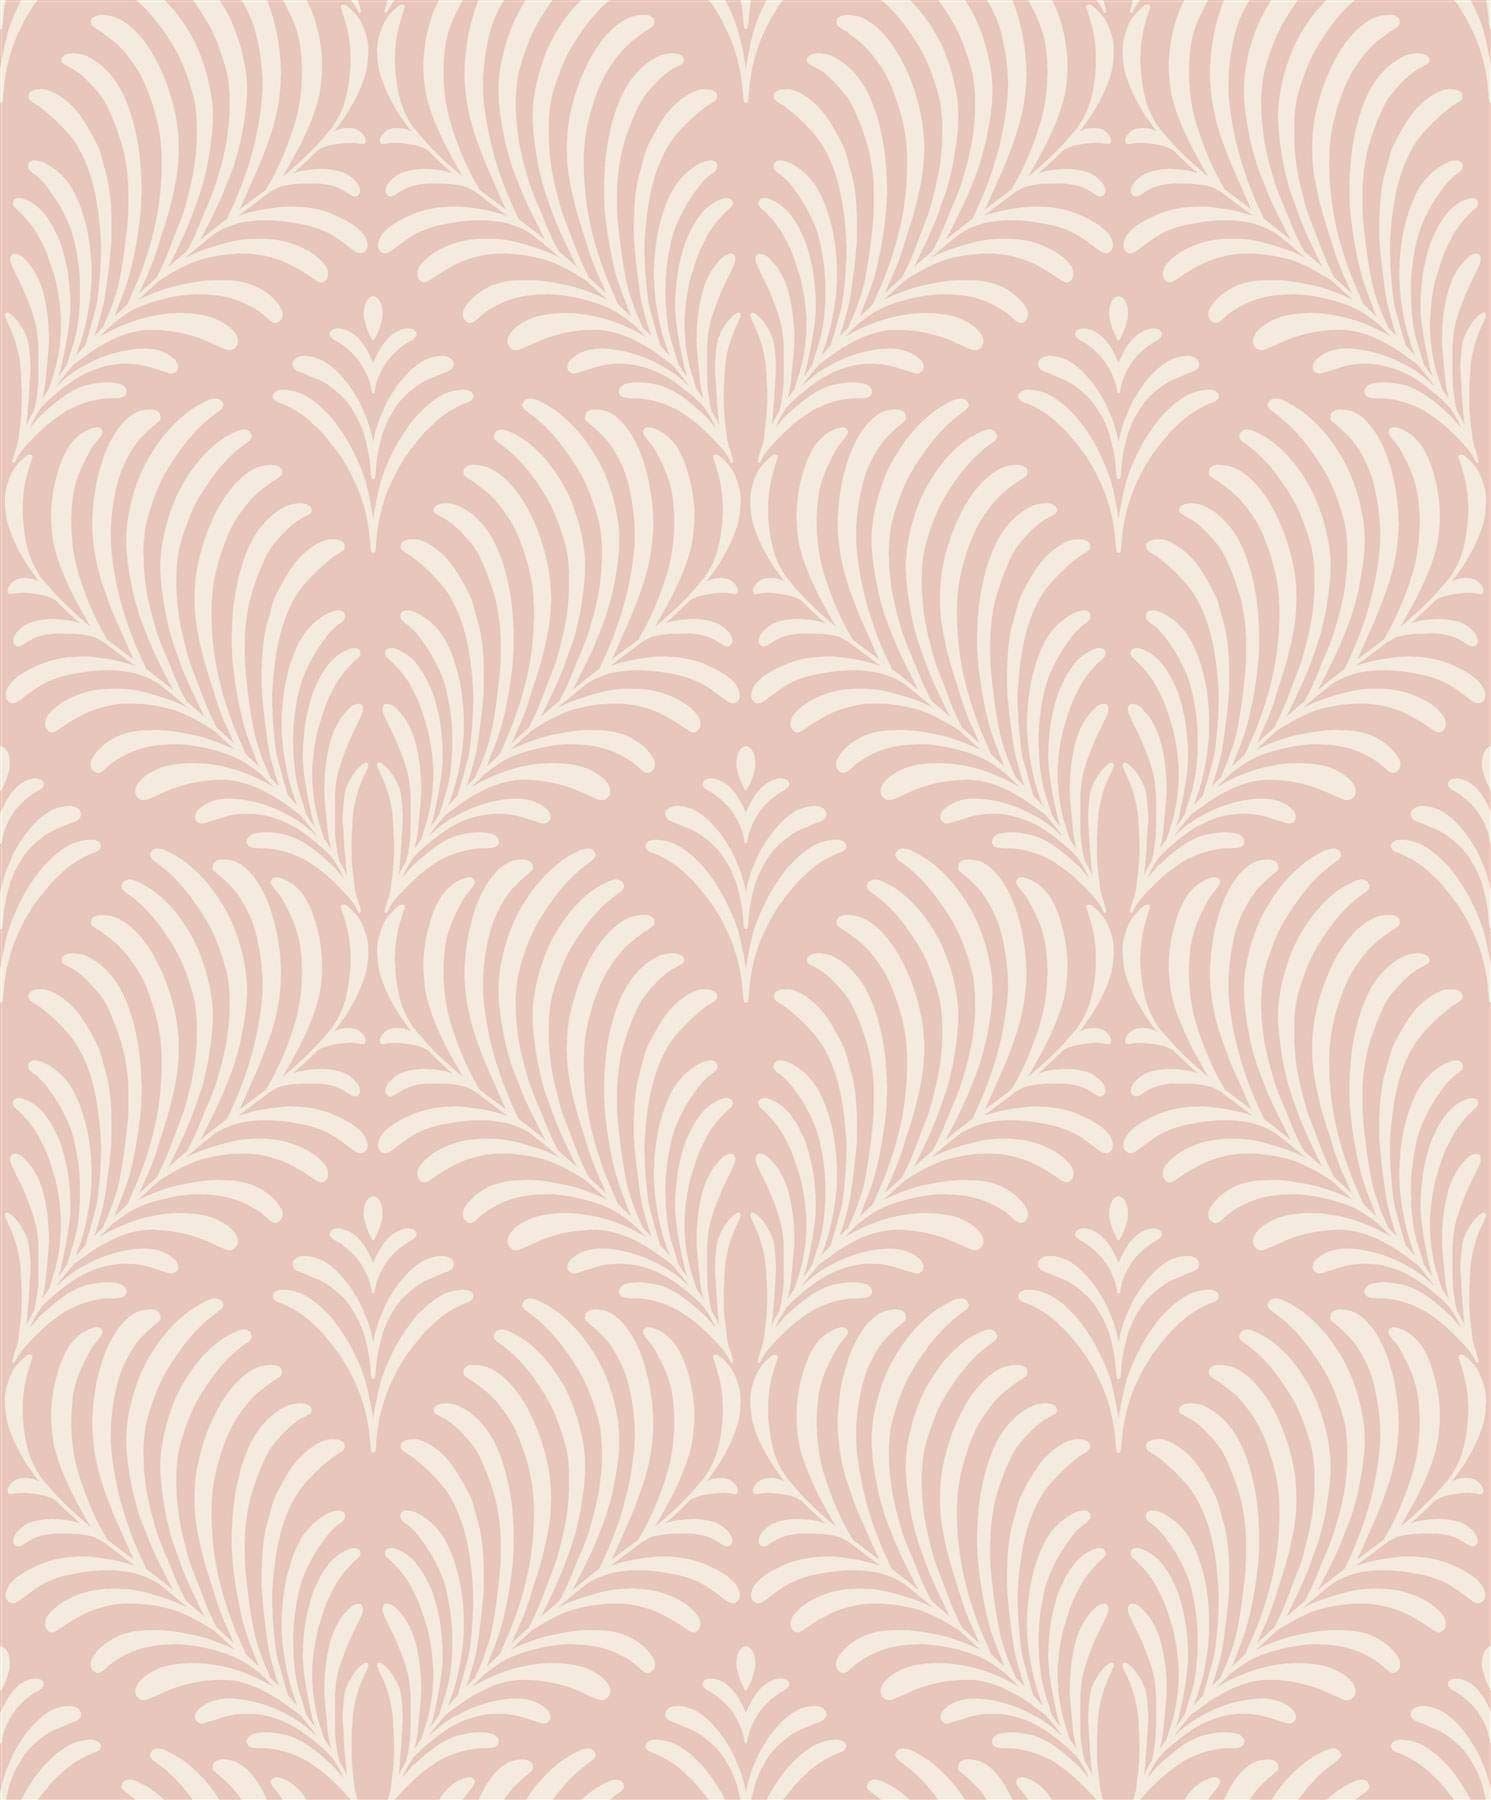 Rasch Paloma Feather Leaf Trail Pink Glitter Motif Luxury Embossed Metallic Wallpaper Paste The Wall Vinyl - All Rooms